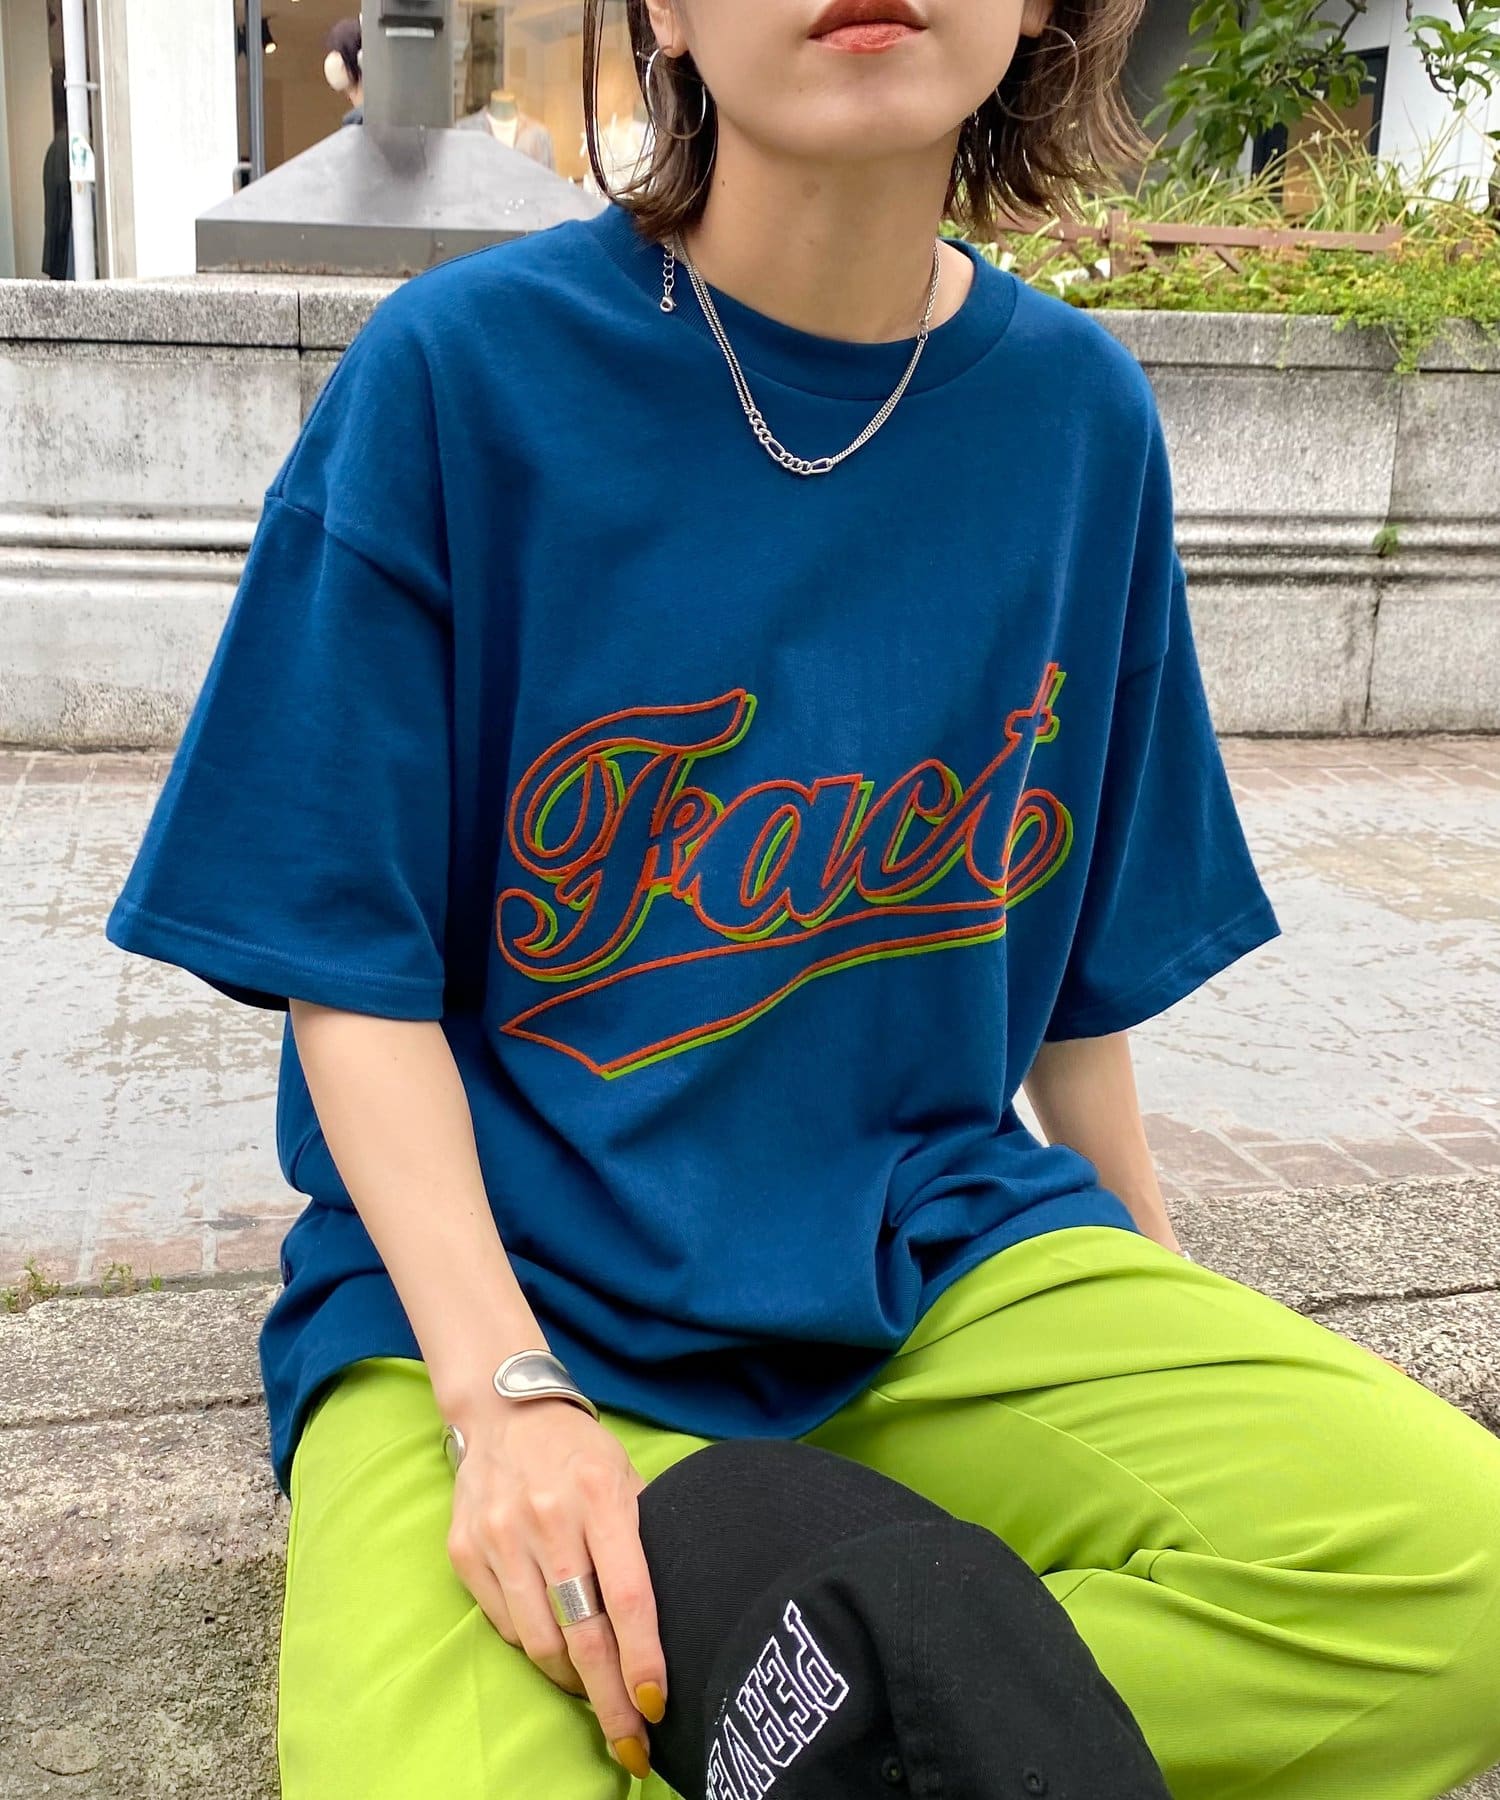 WHO’S WHO gallery(フーズフーギャラリー) COOPER FACTフロッキーTEE